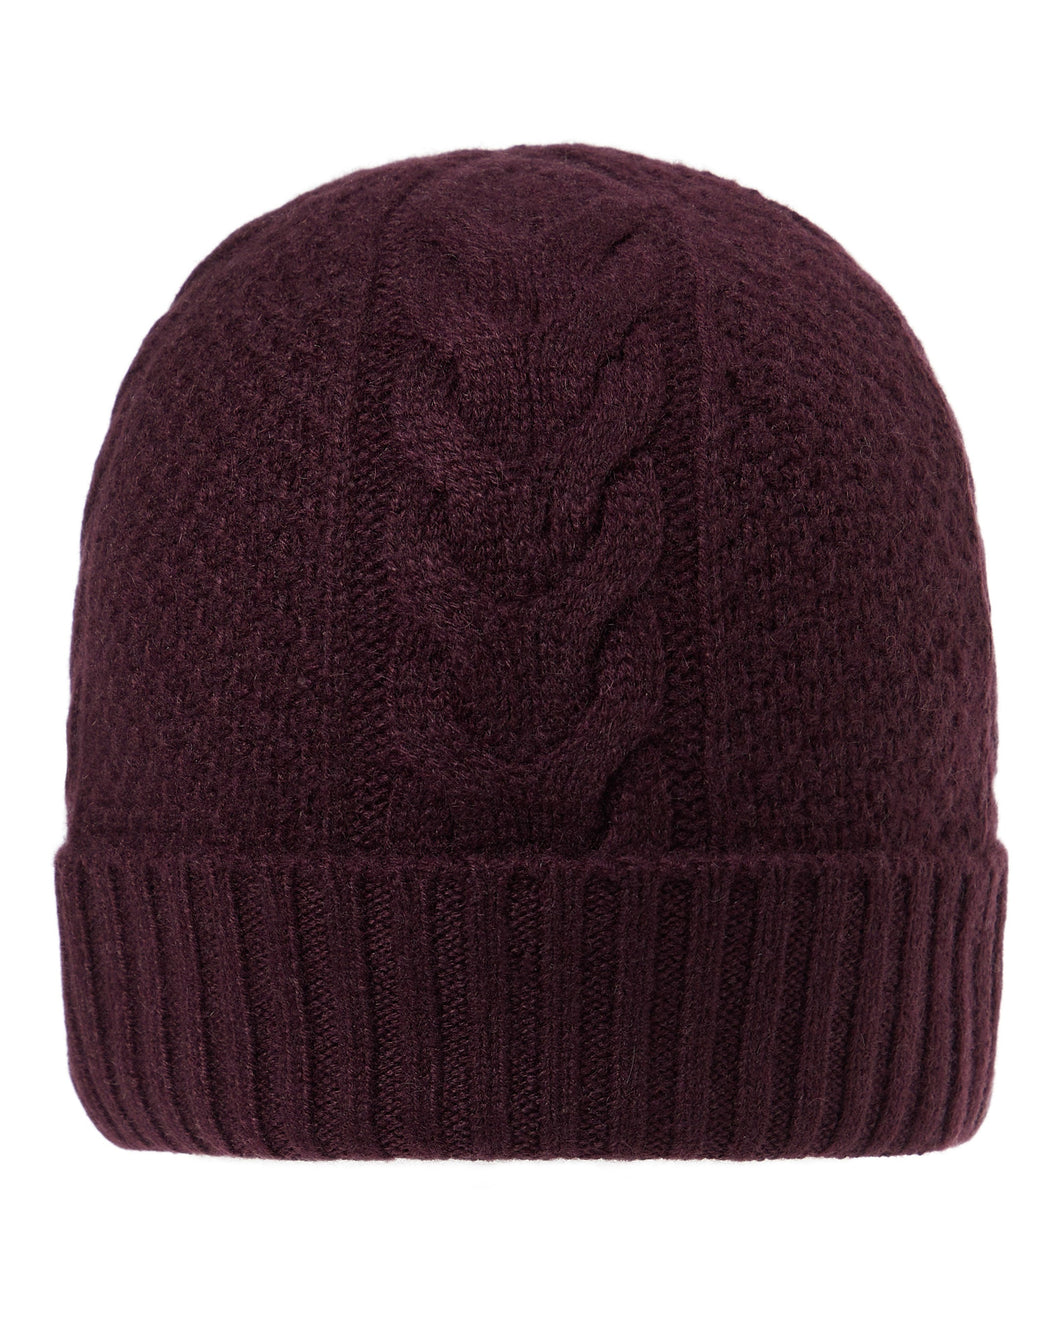 N.Peal Women's Cable Cashmere Hat Plum Purple